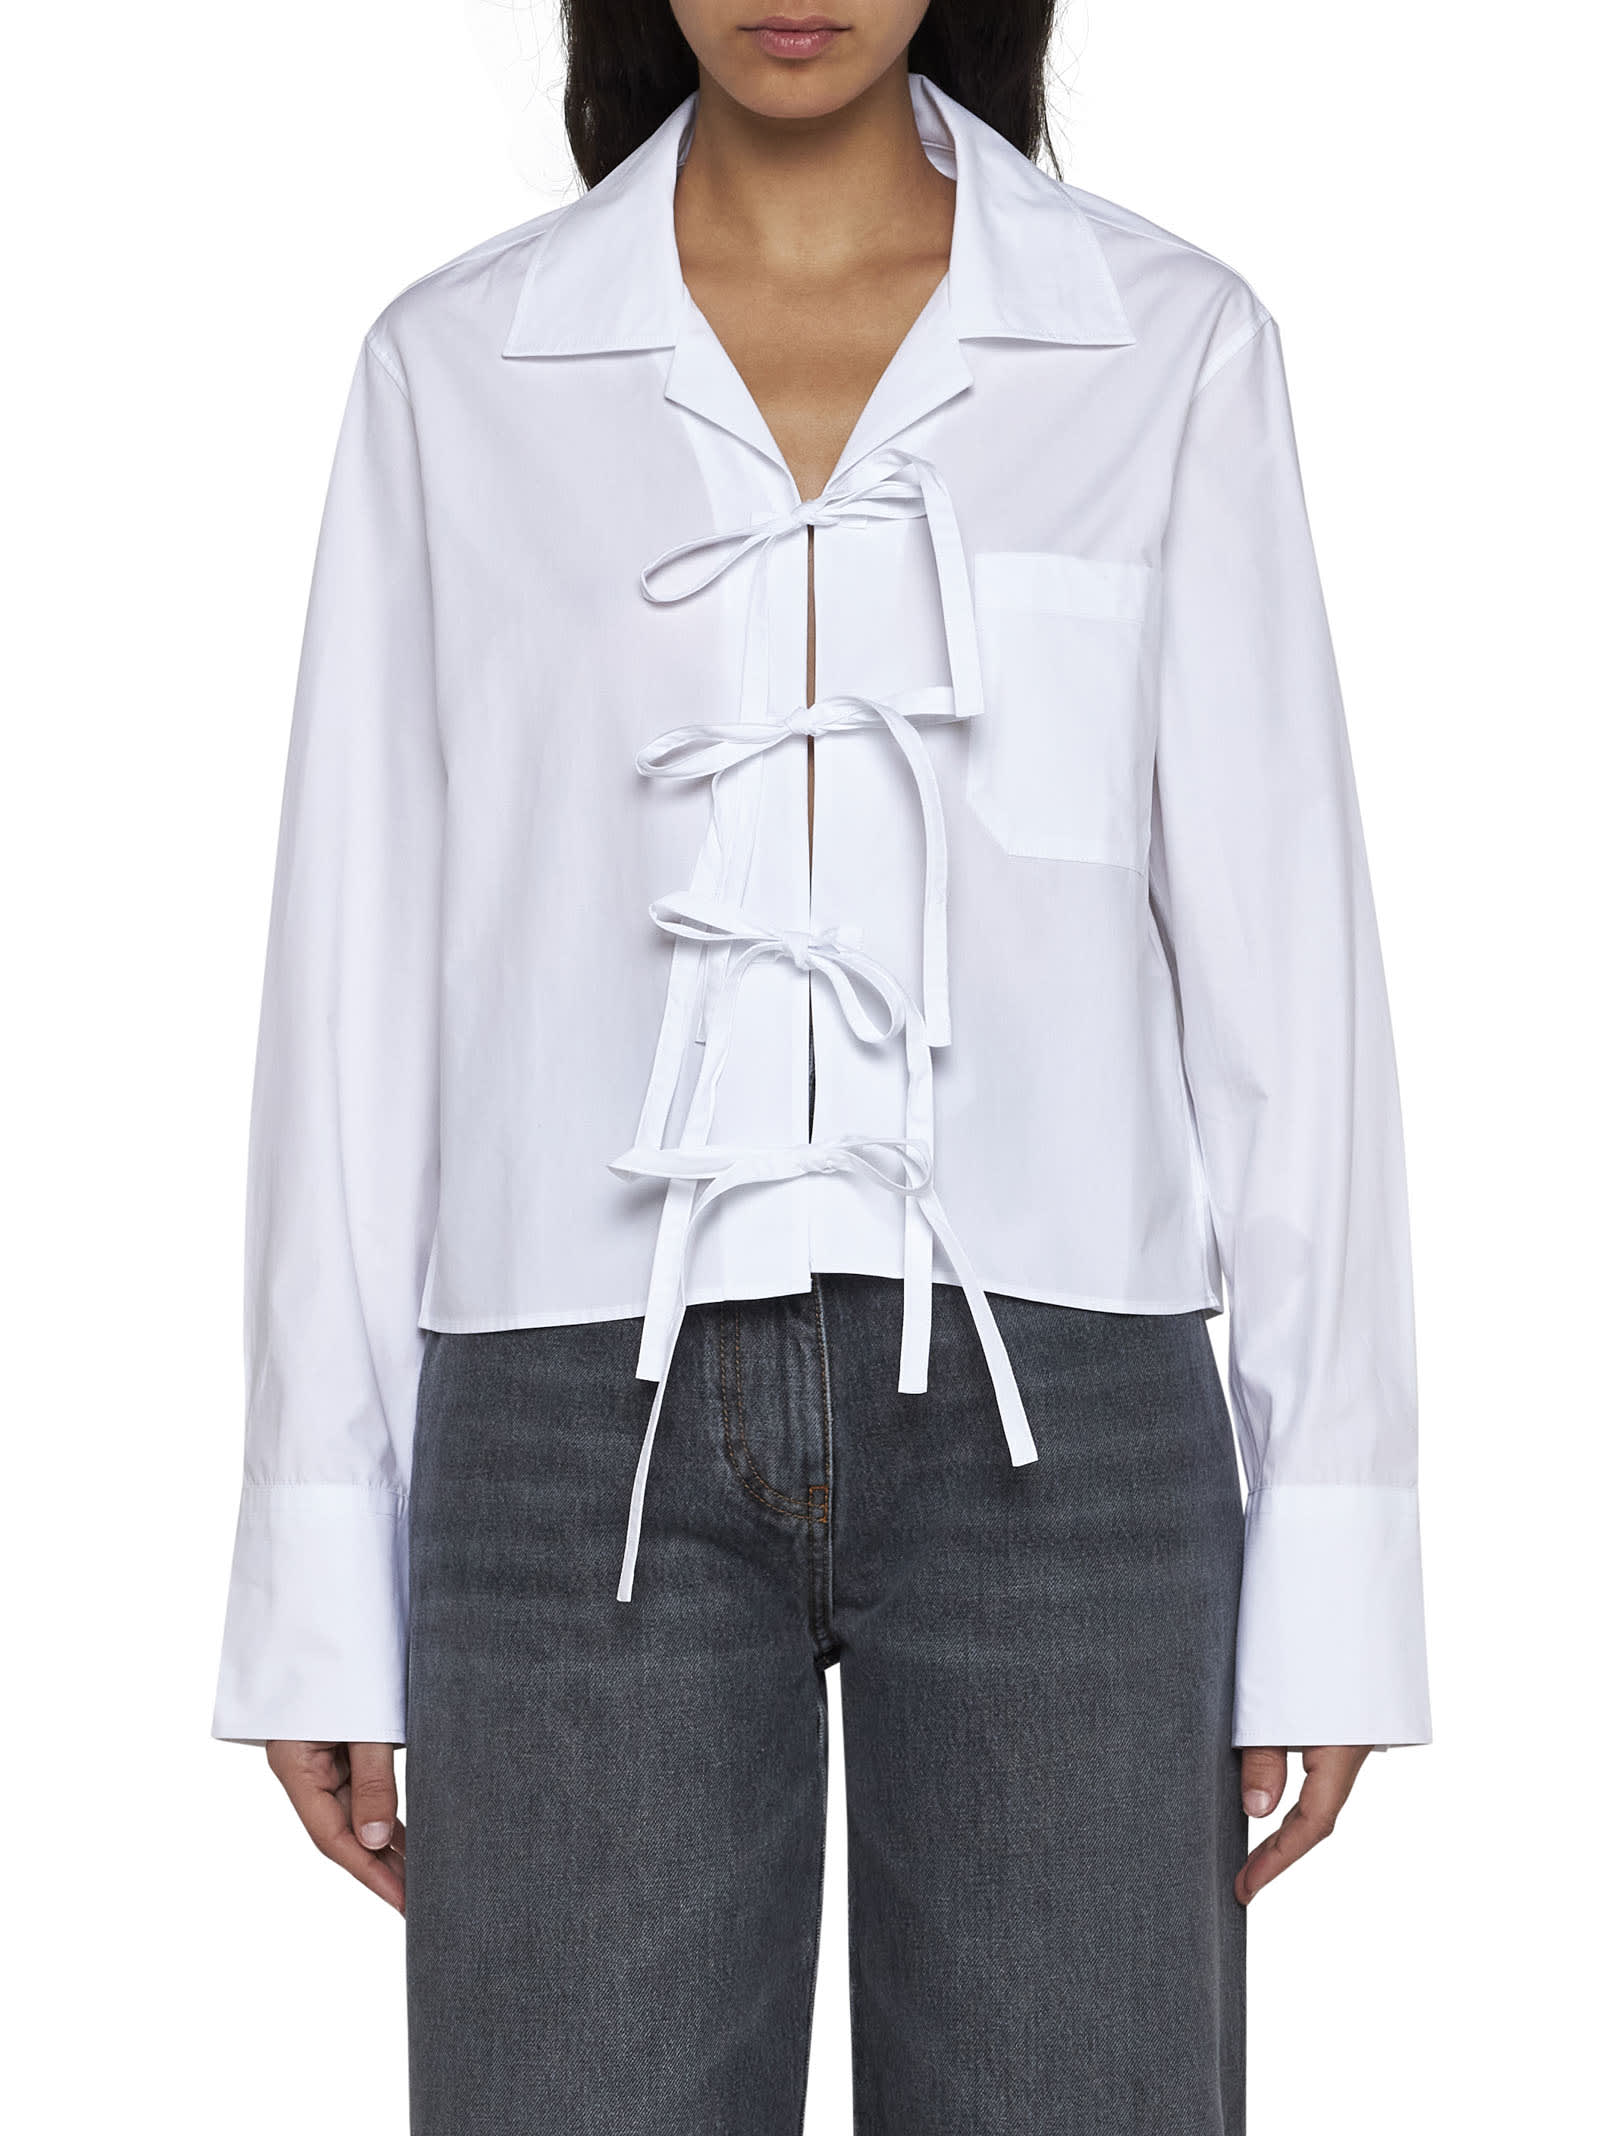 Shop Jw Anderson Shirt In White